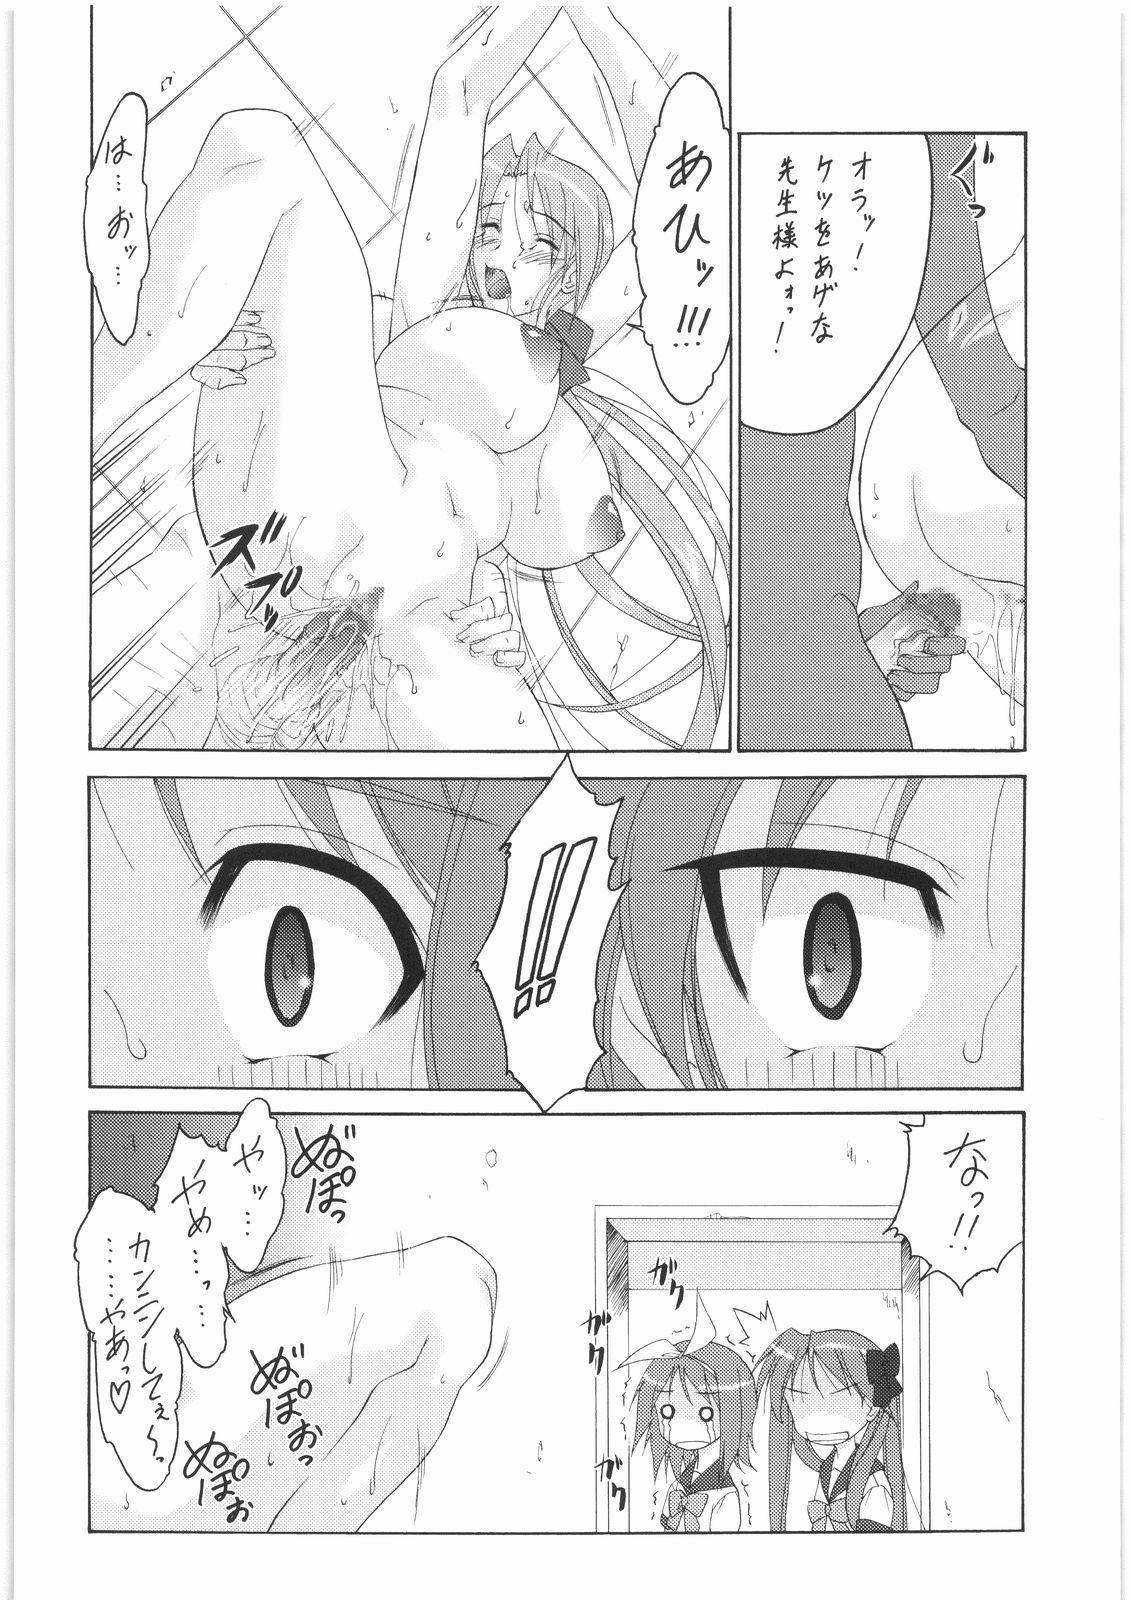 Old And Young Konata no Maruhi Baito - Lucky star Gay Party - Page 7